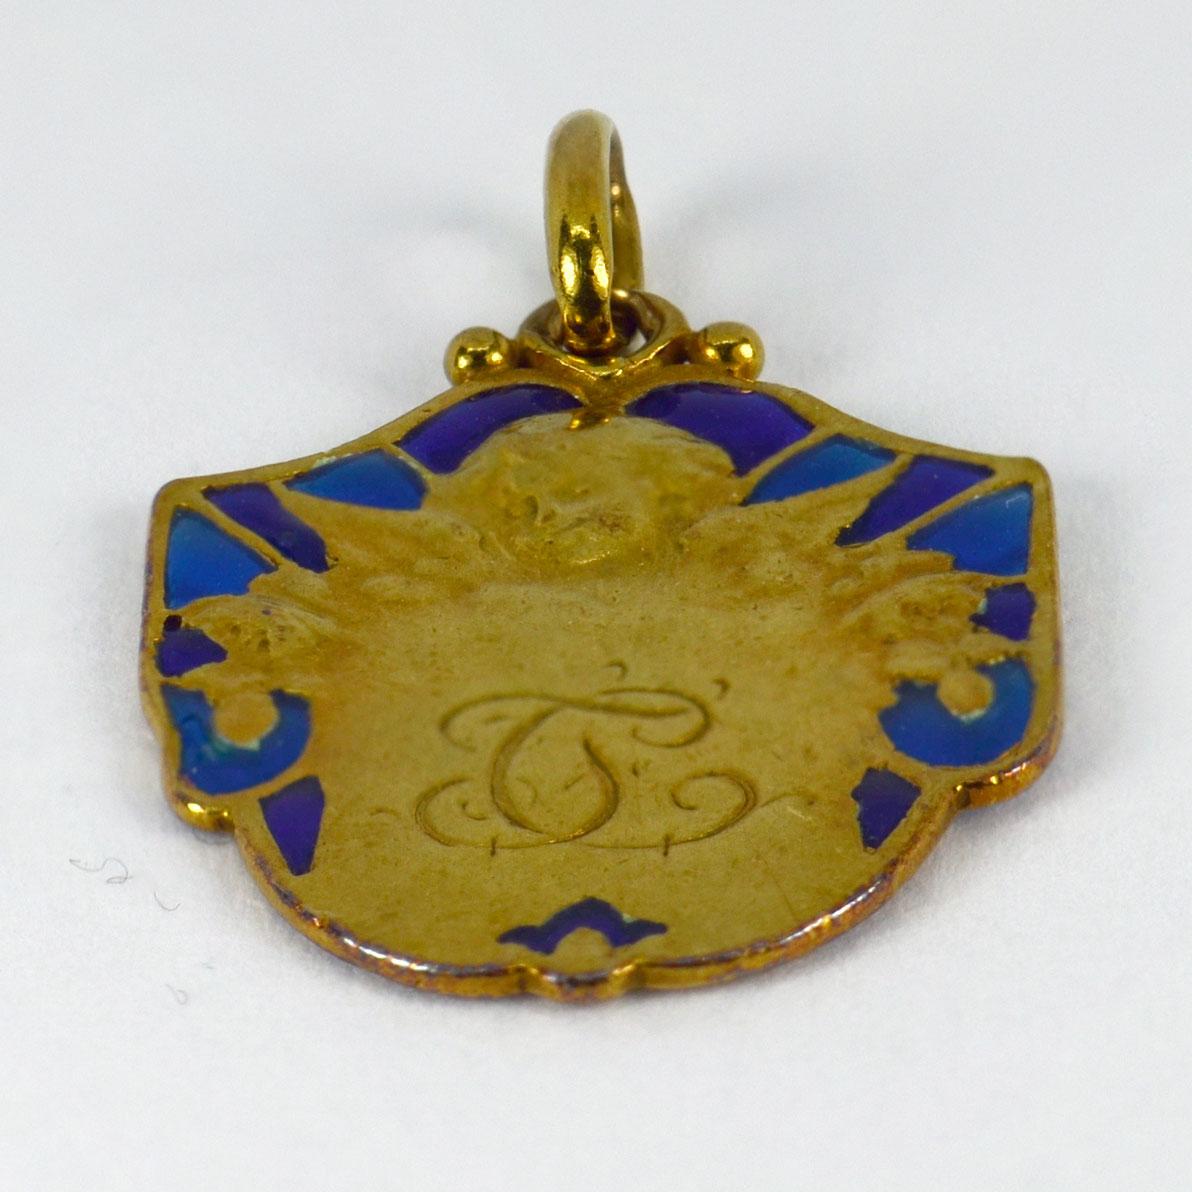 An 18 karat (18K) yellow gold pendant designed as a medal depicting a cherub with a blue plique-a-jour surround. Engraved to the reverse with a monogram of TC/JC and the date ‘23/12/23’.  Stamped with the eagle’s head for French manufacture and 18